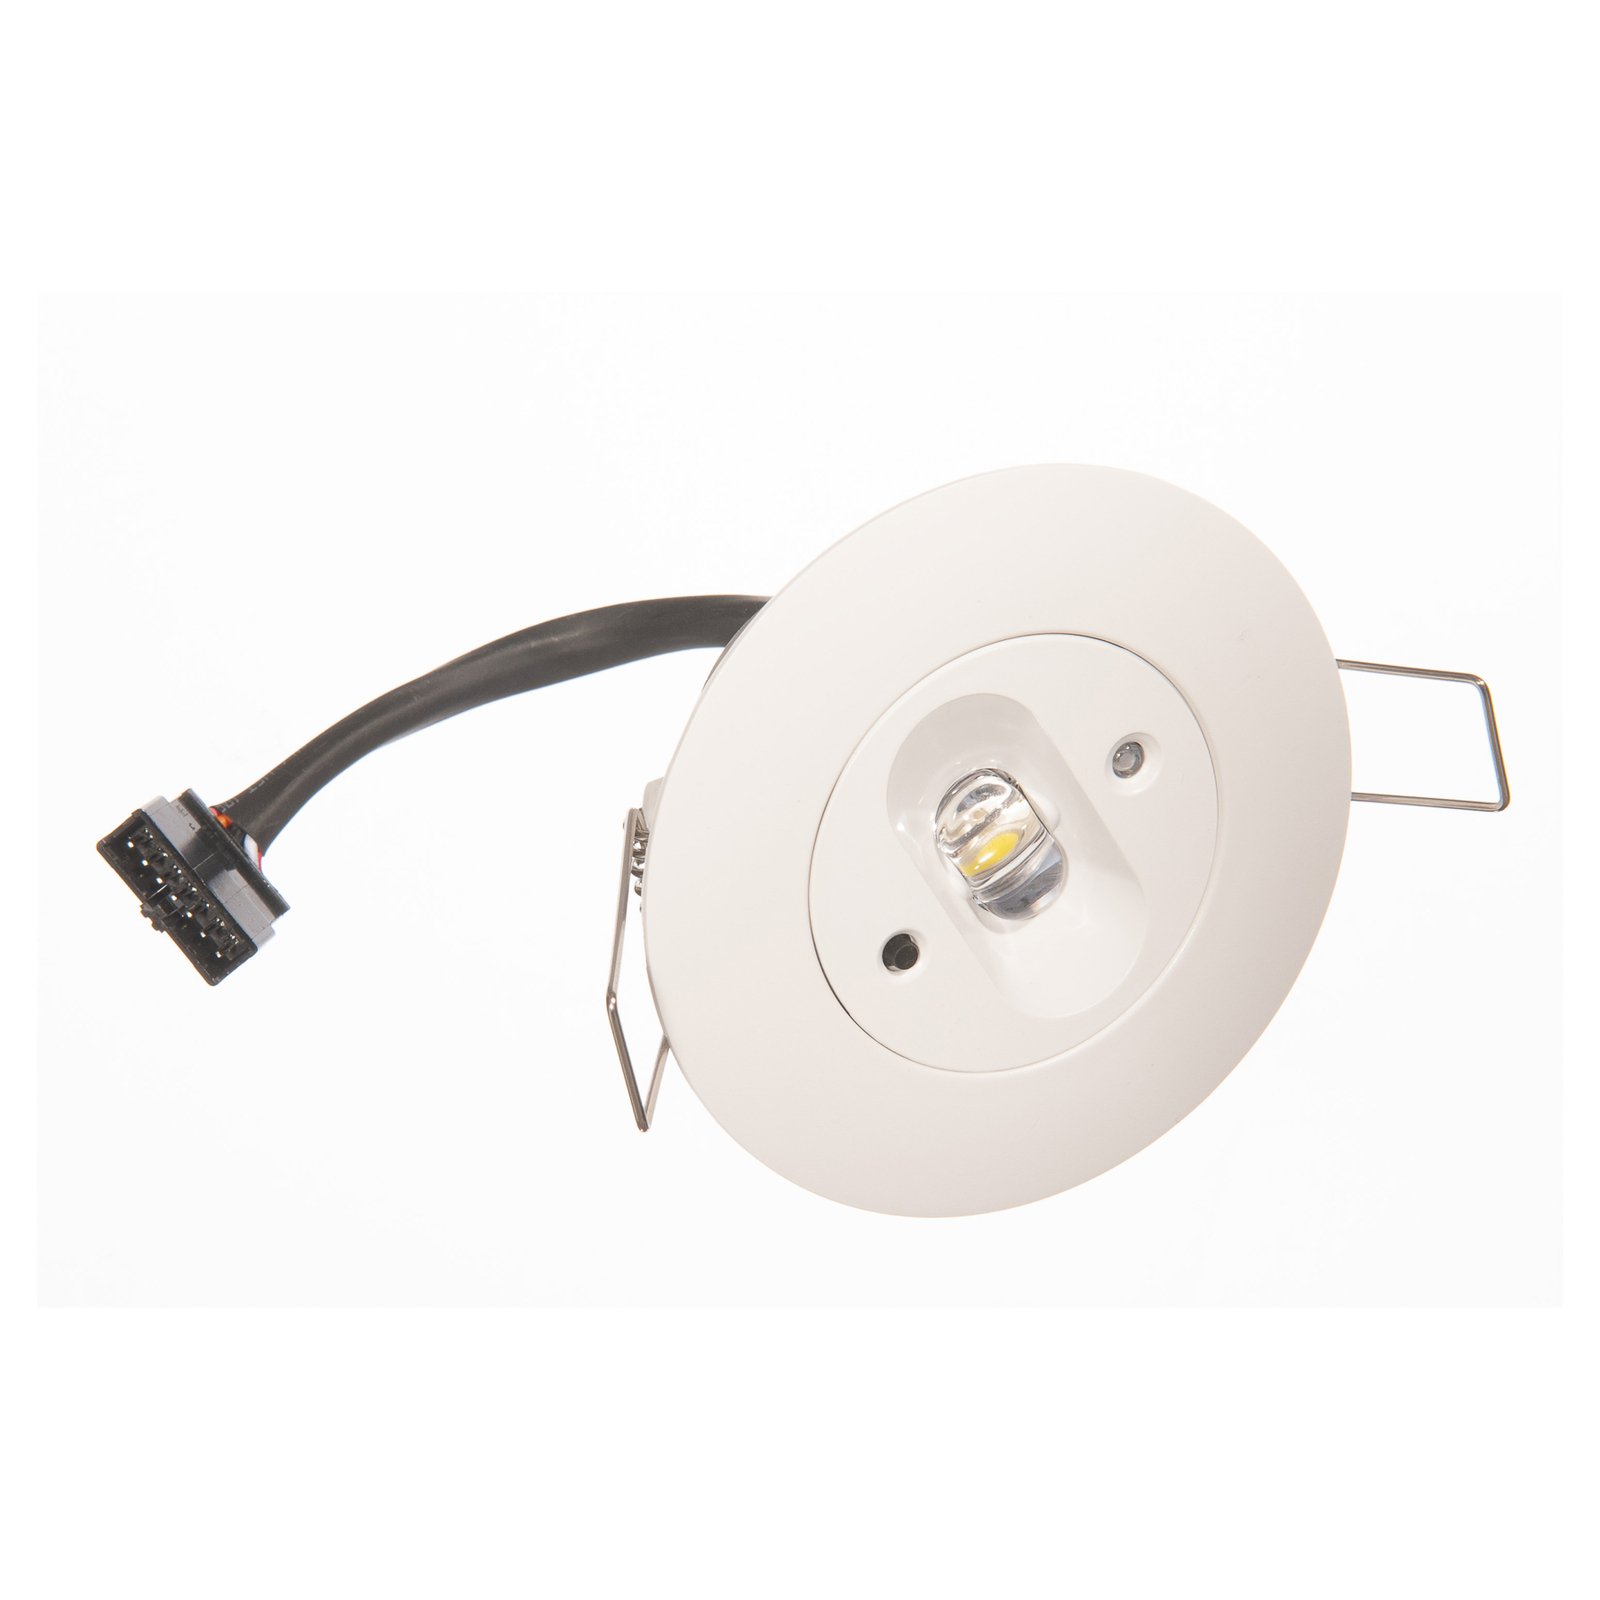 S-LUX Standard LED safety light, ceiling recessed